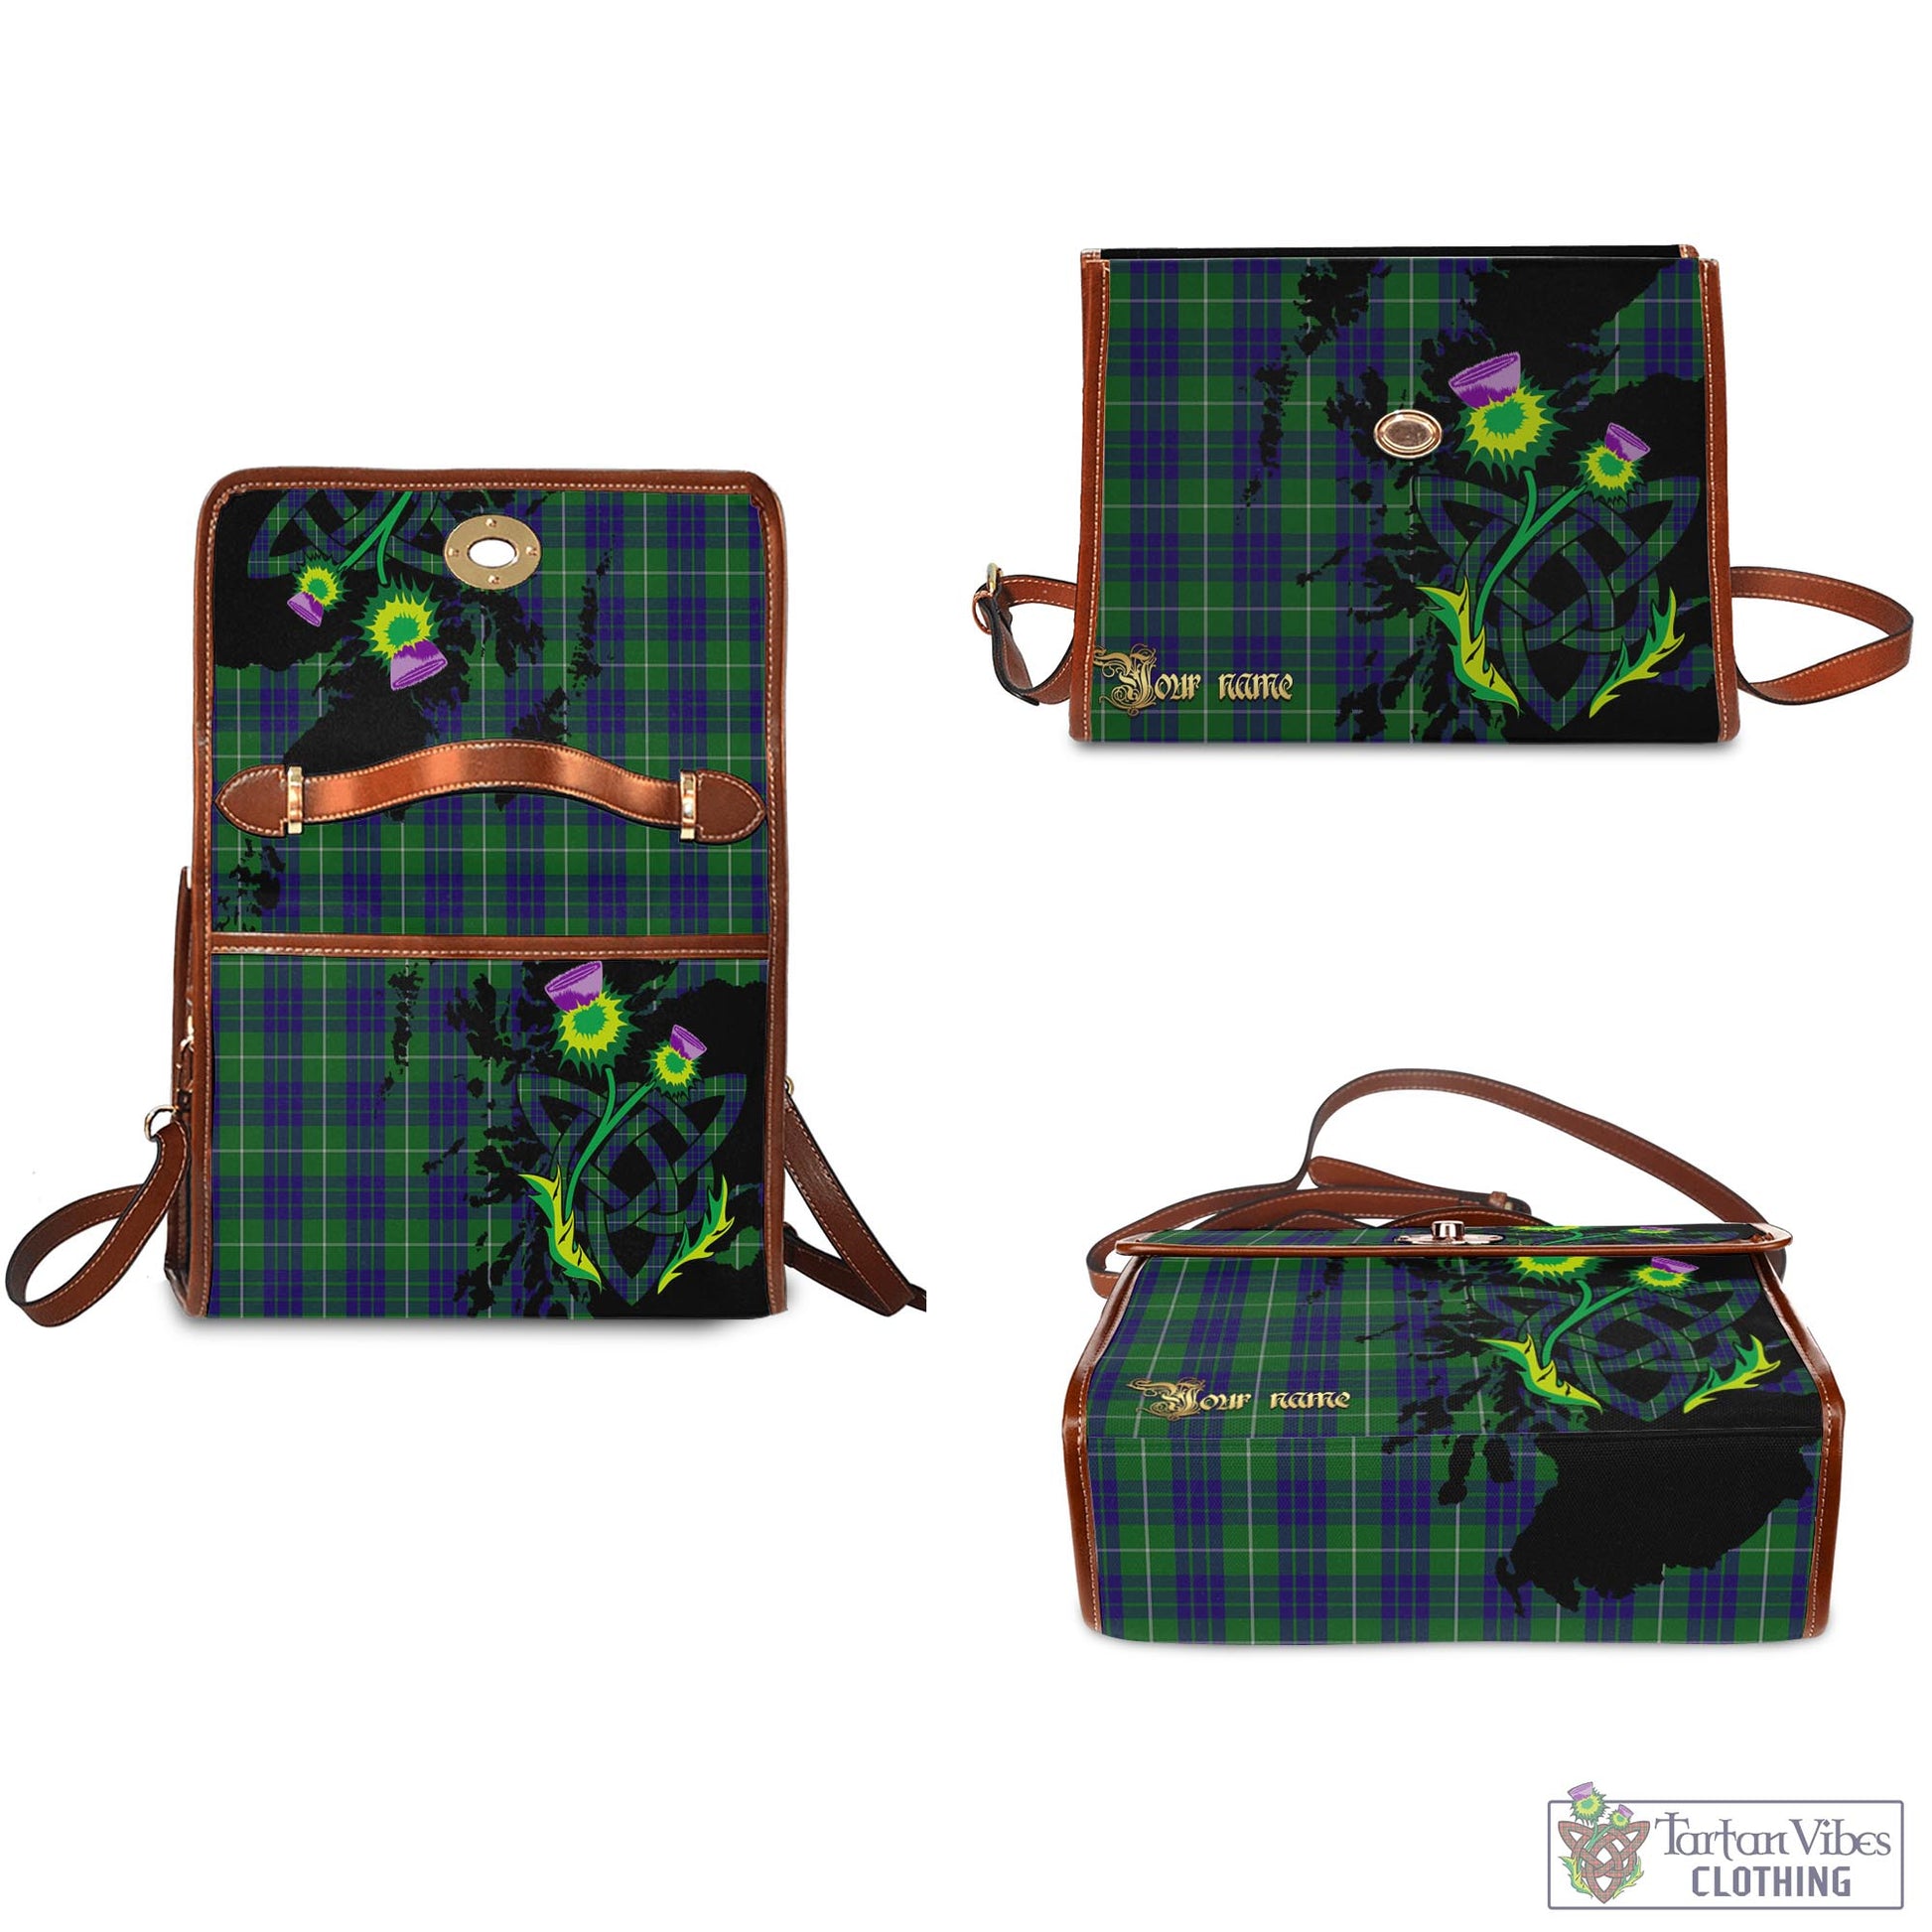 Tartan Vibes Clothing Hamilton Green Hunting Tartan Waterproof Canvas Bag with Scotland Map and Thistle Celtic Accents